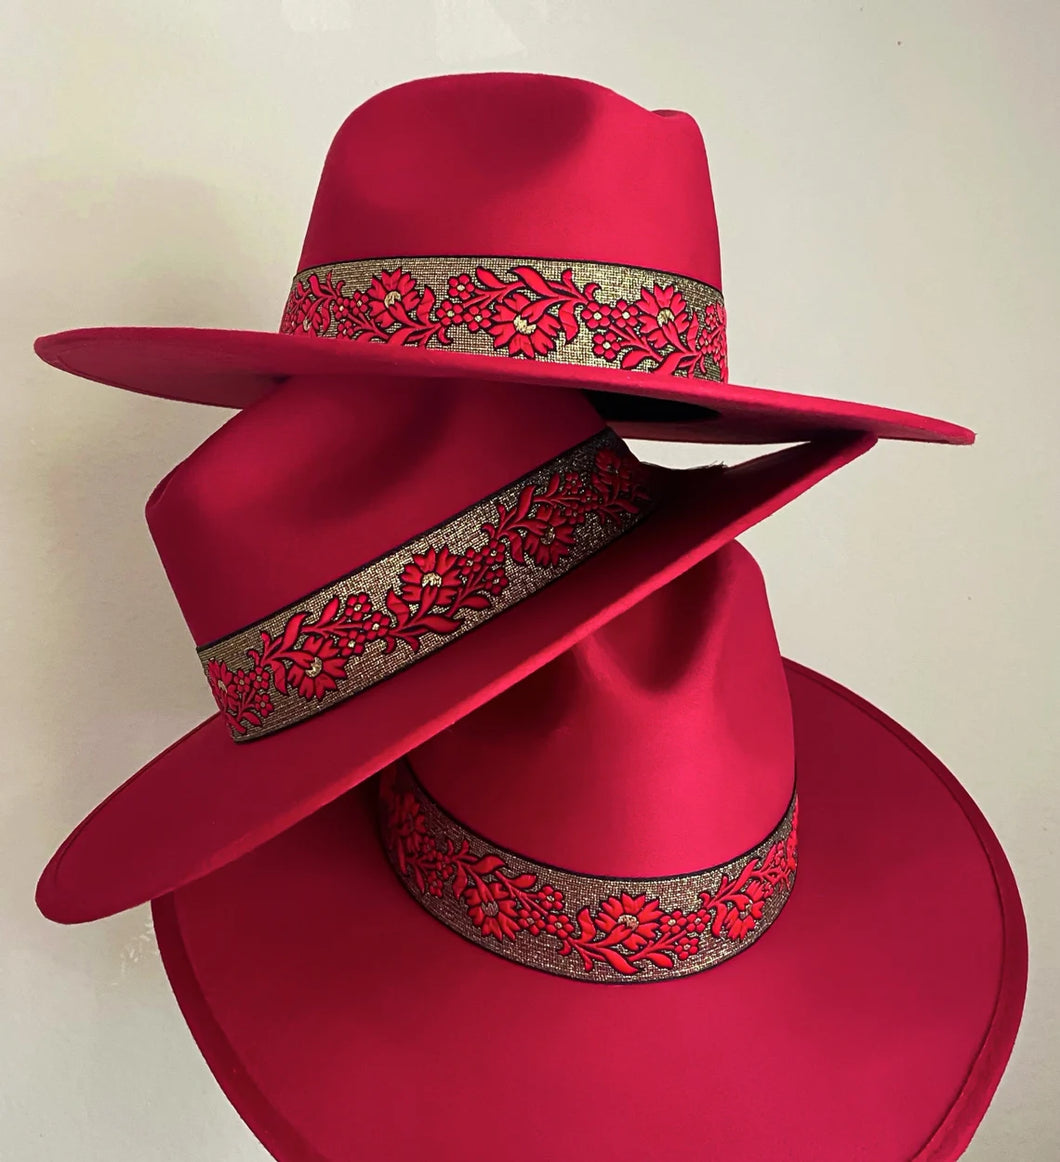 Fedora suede “Audrey” in cherry color/ large brim/ special edition